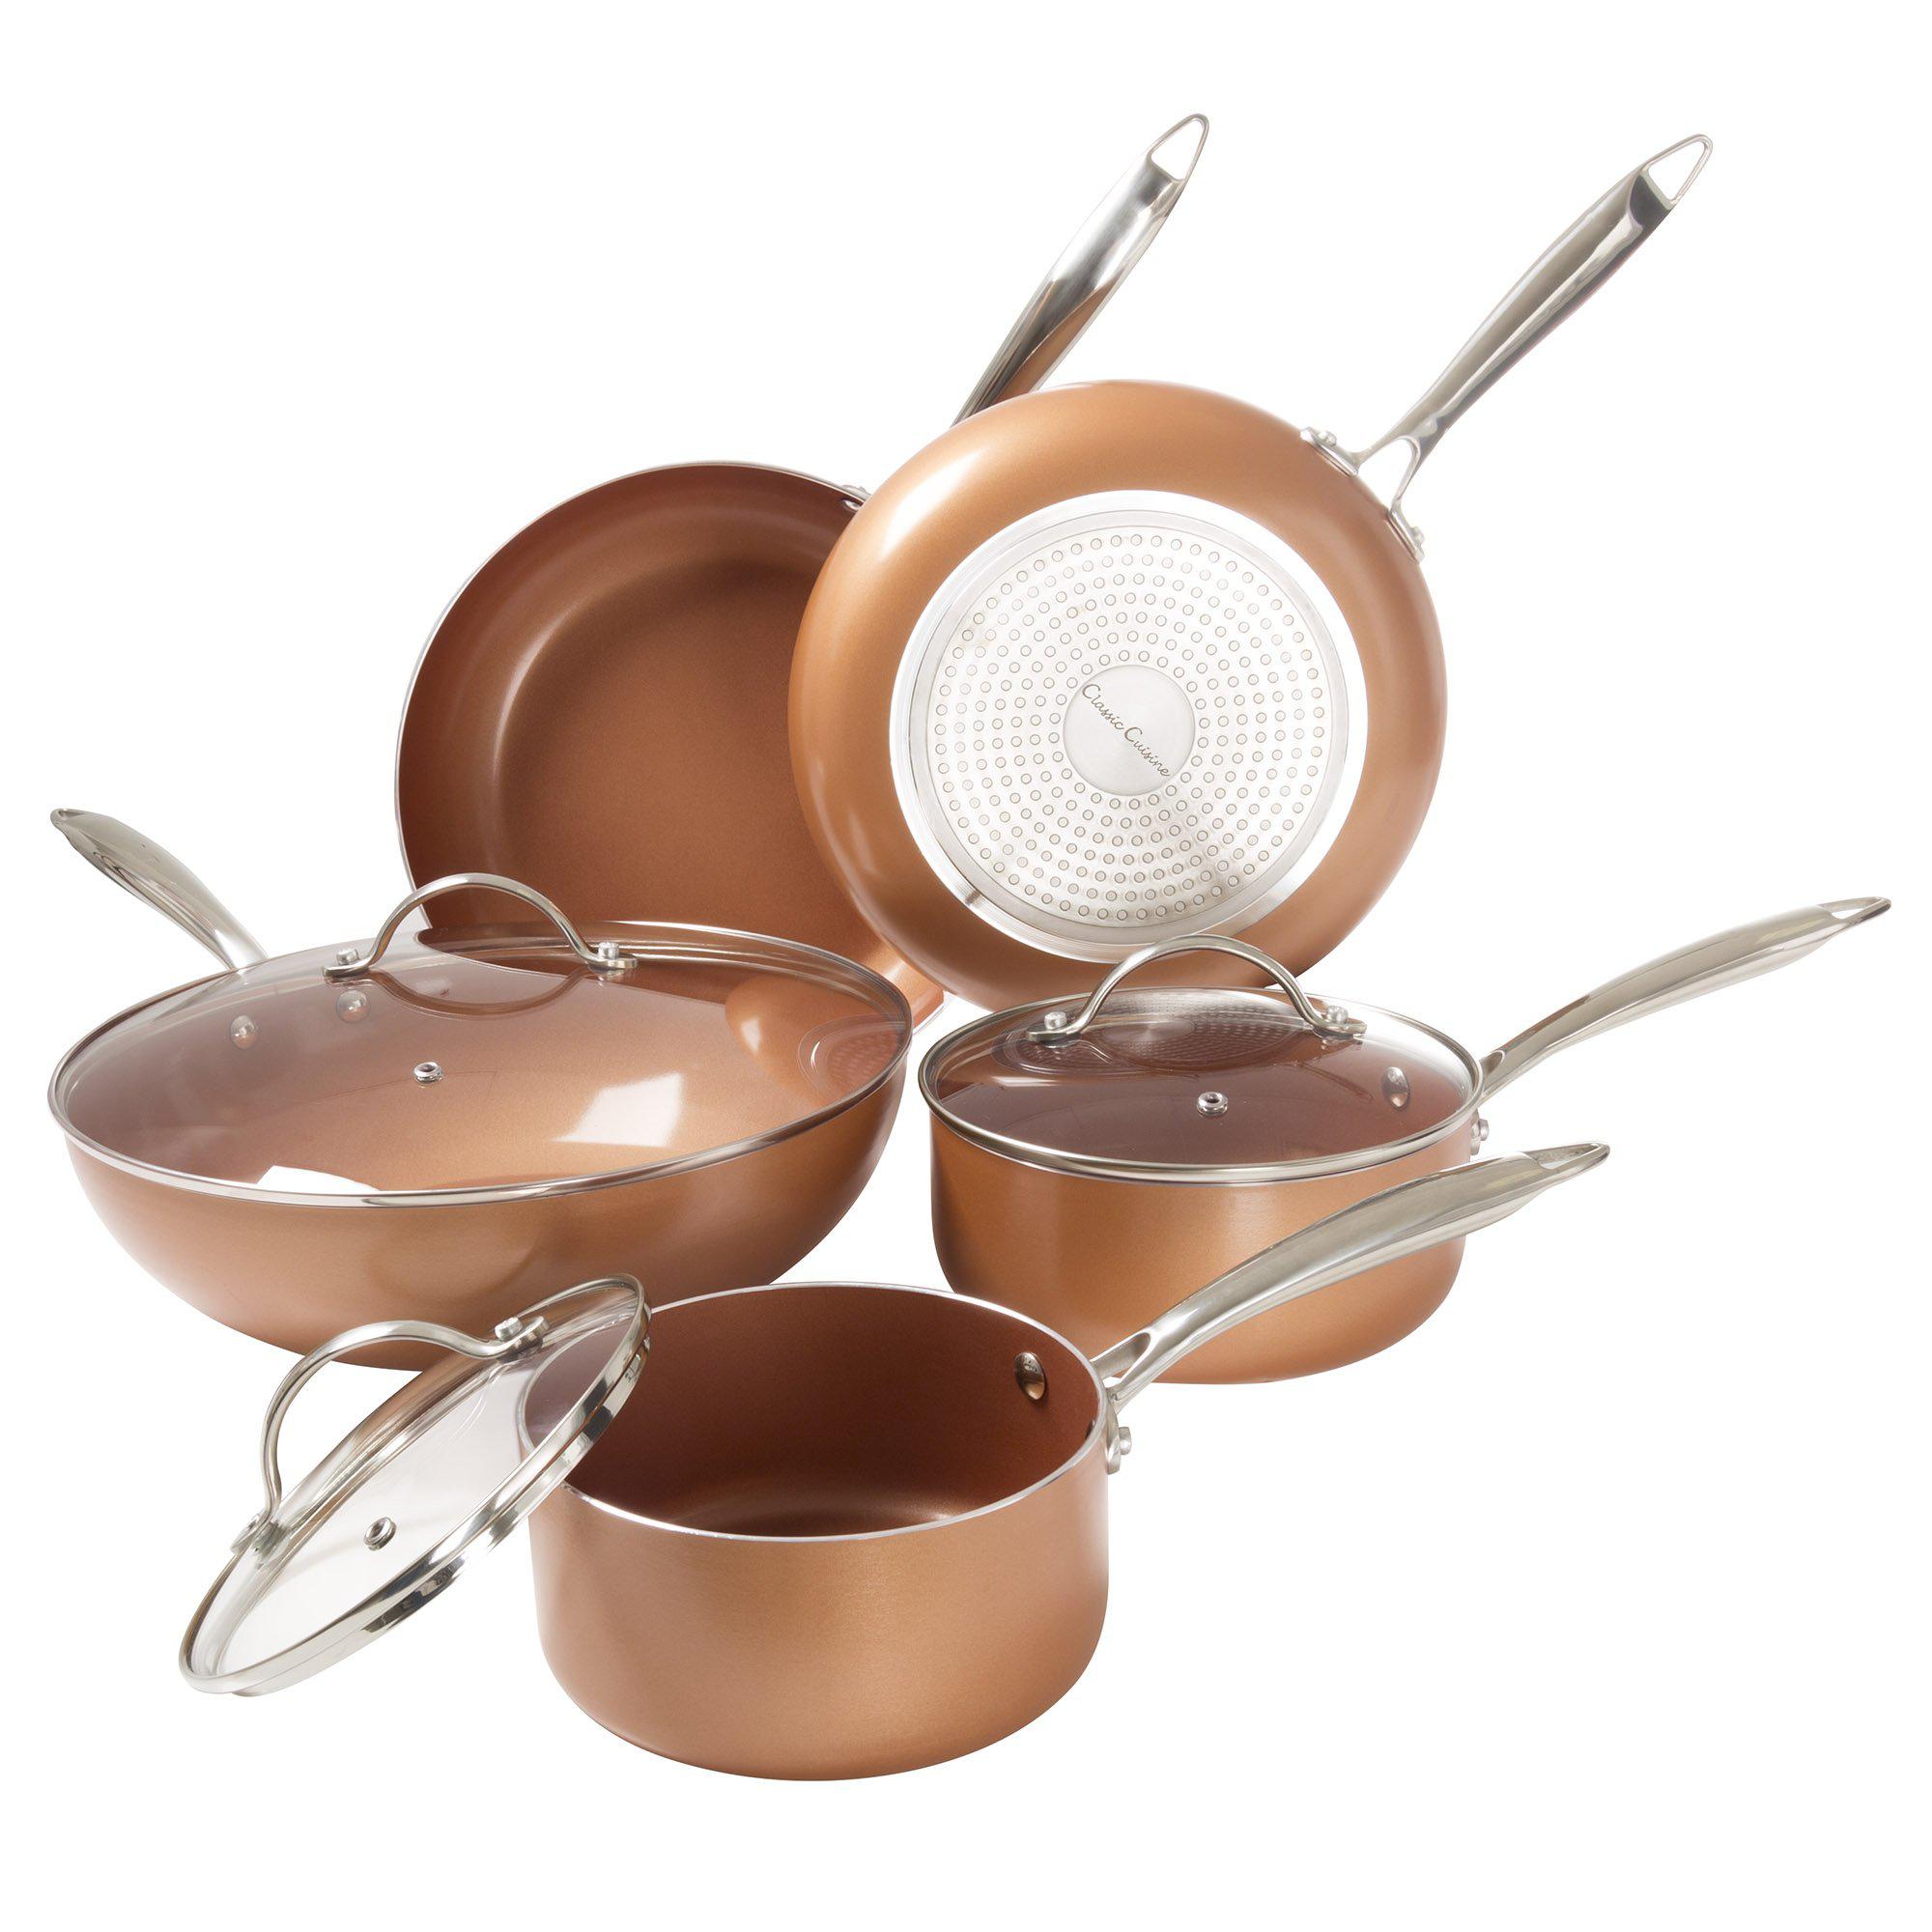 Classic Cuisine 8 Pc Cookware Set with 2 Layer Nonstick Ceramic Coating Tempered Glass Lid Copper Color Finish Dishwasher Oven Safe